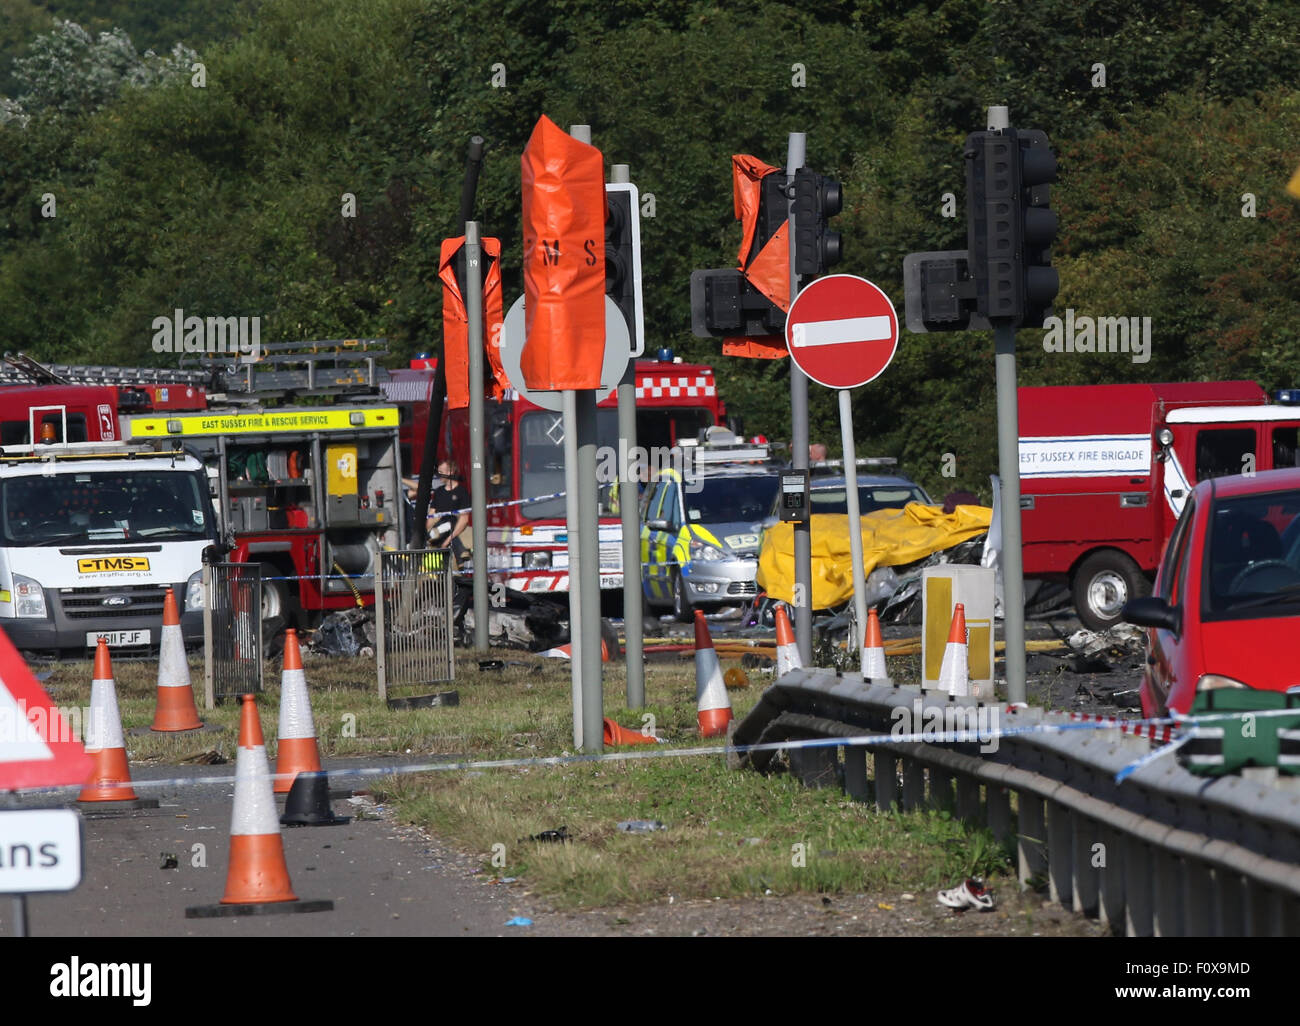 Shoreham, UK. 22nd August, 2015. GV Showing the scene of the A27 Shoreham Seven People have been killed after a plane crashed on to the A27 whilst displaying  Police have closed the road The Air crashed at an event marking the Second World War at Shoreham Airshow  today.    Seven people have died after a Hawker Hunter jet crashed into several vehicles during Shoreham Airshow.  South East Coast Ambulance Service said the victims all died at the scene, with a further person being taken to hospital in critical condition.   Credit:  jason kay/Alamy Live News Stock Photo